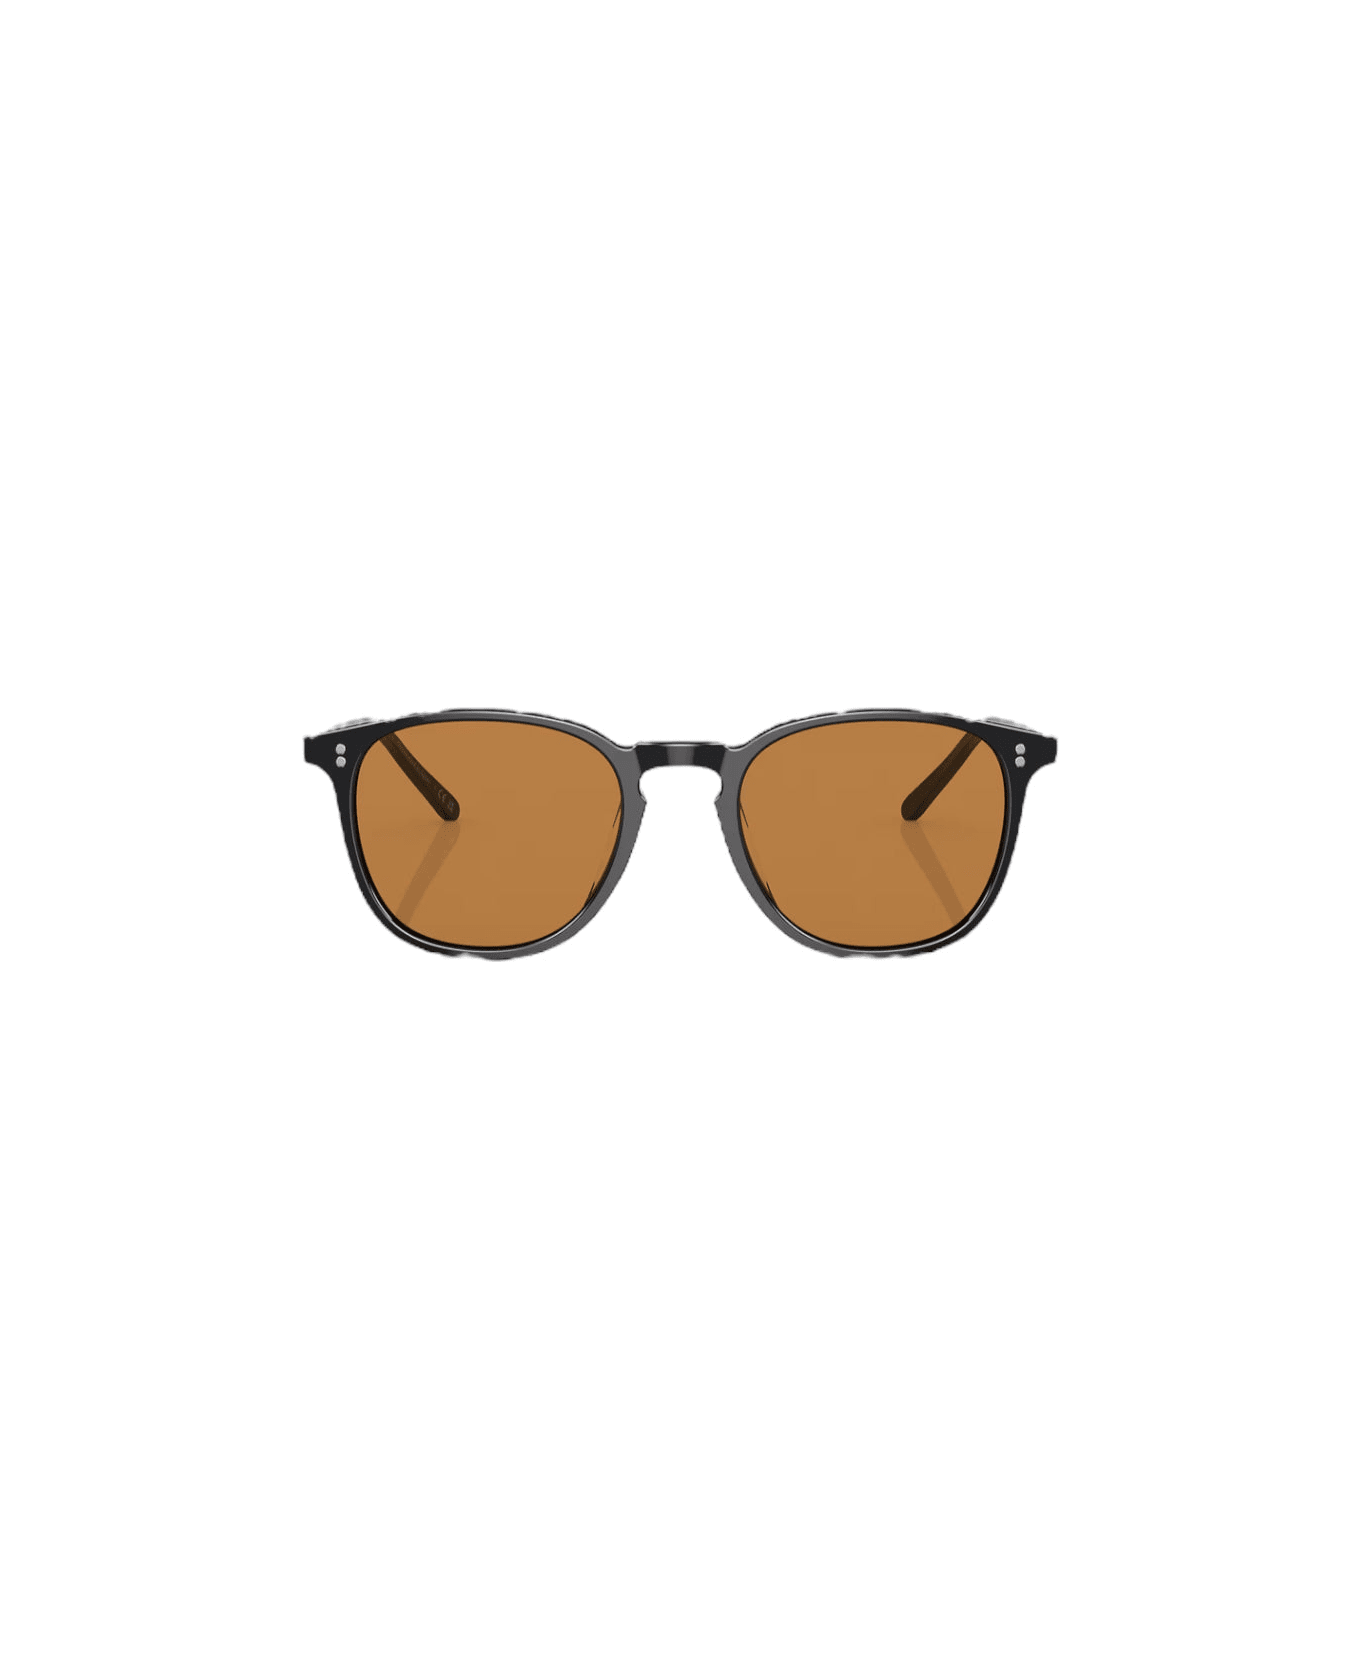 Oliver Peoples Finley Sun 1993 Sunglasses